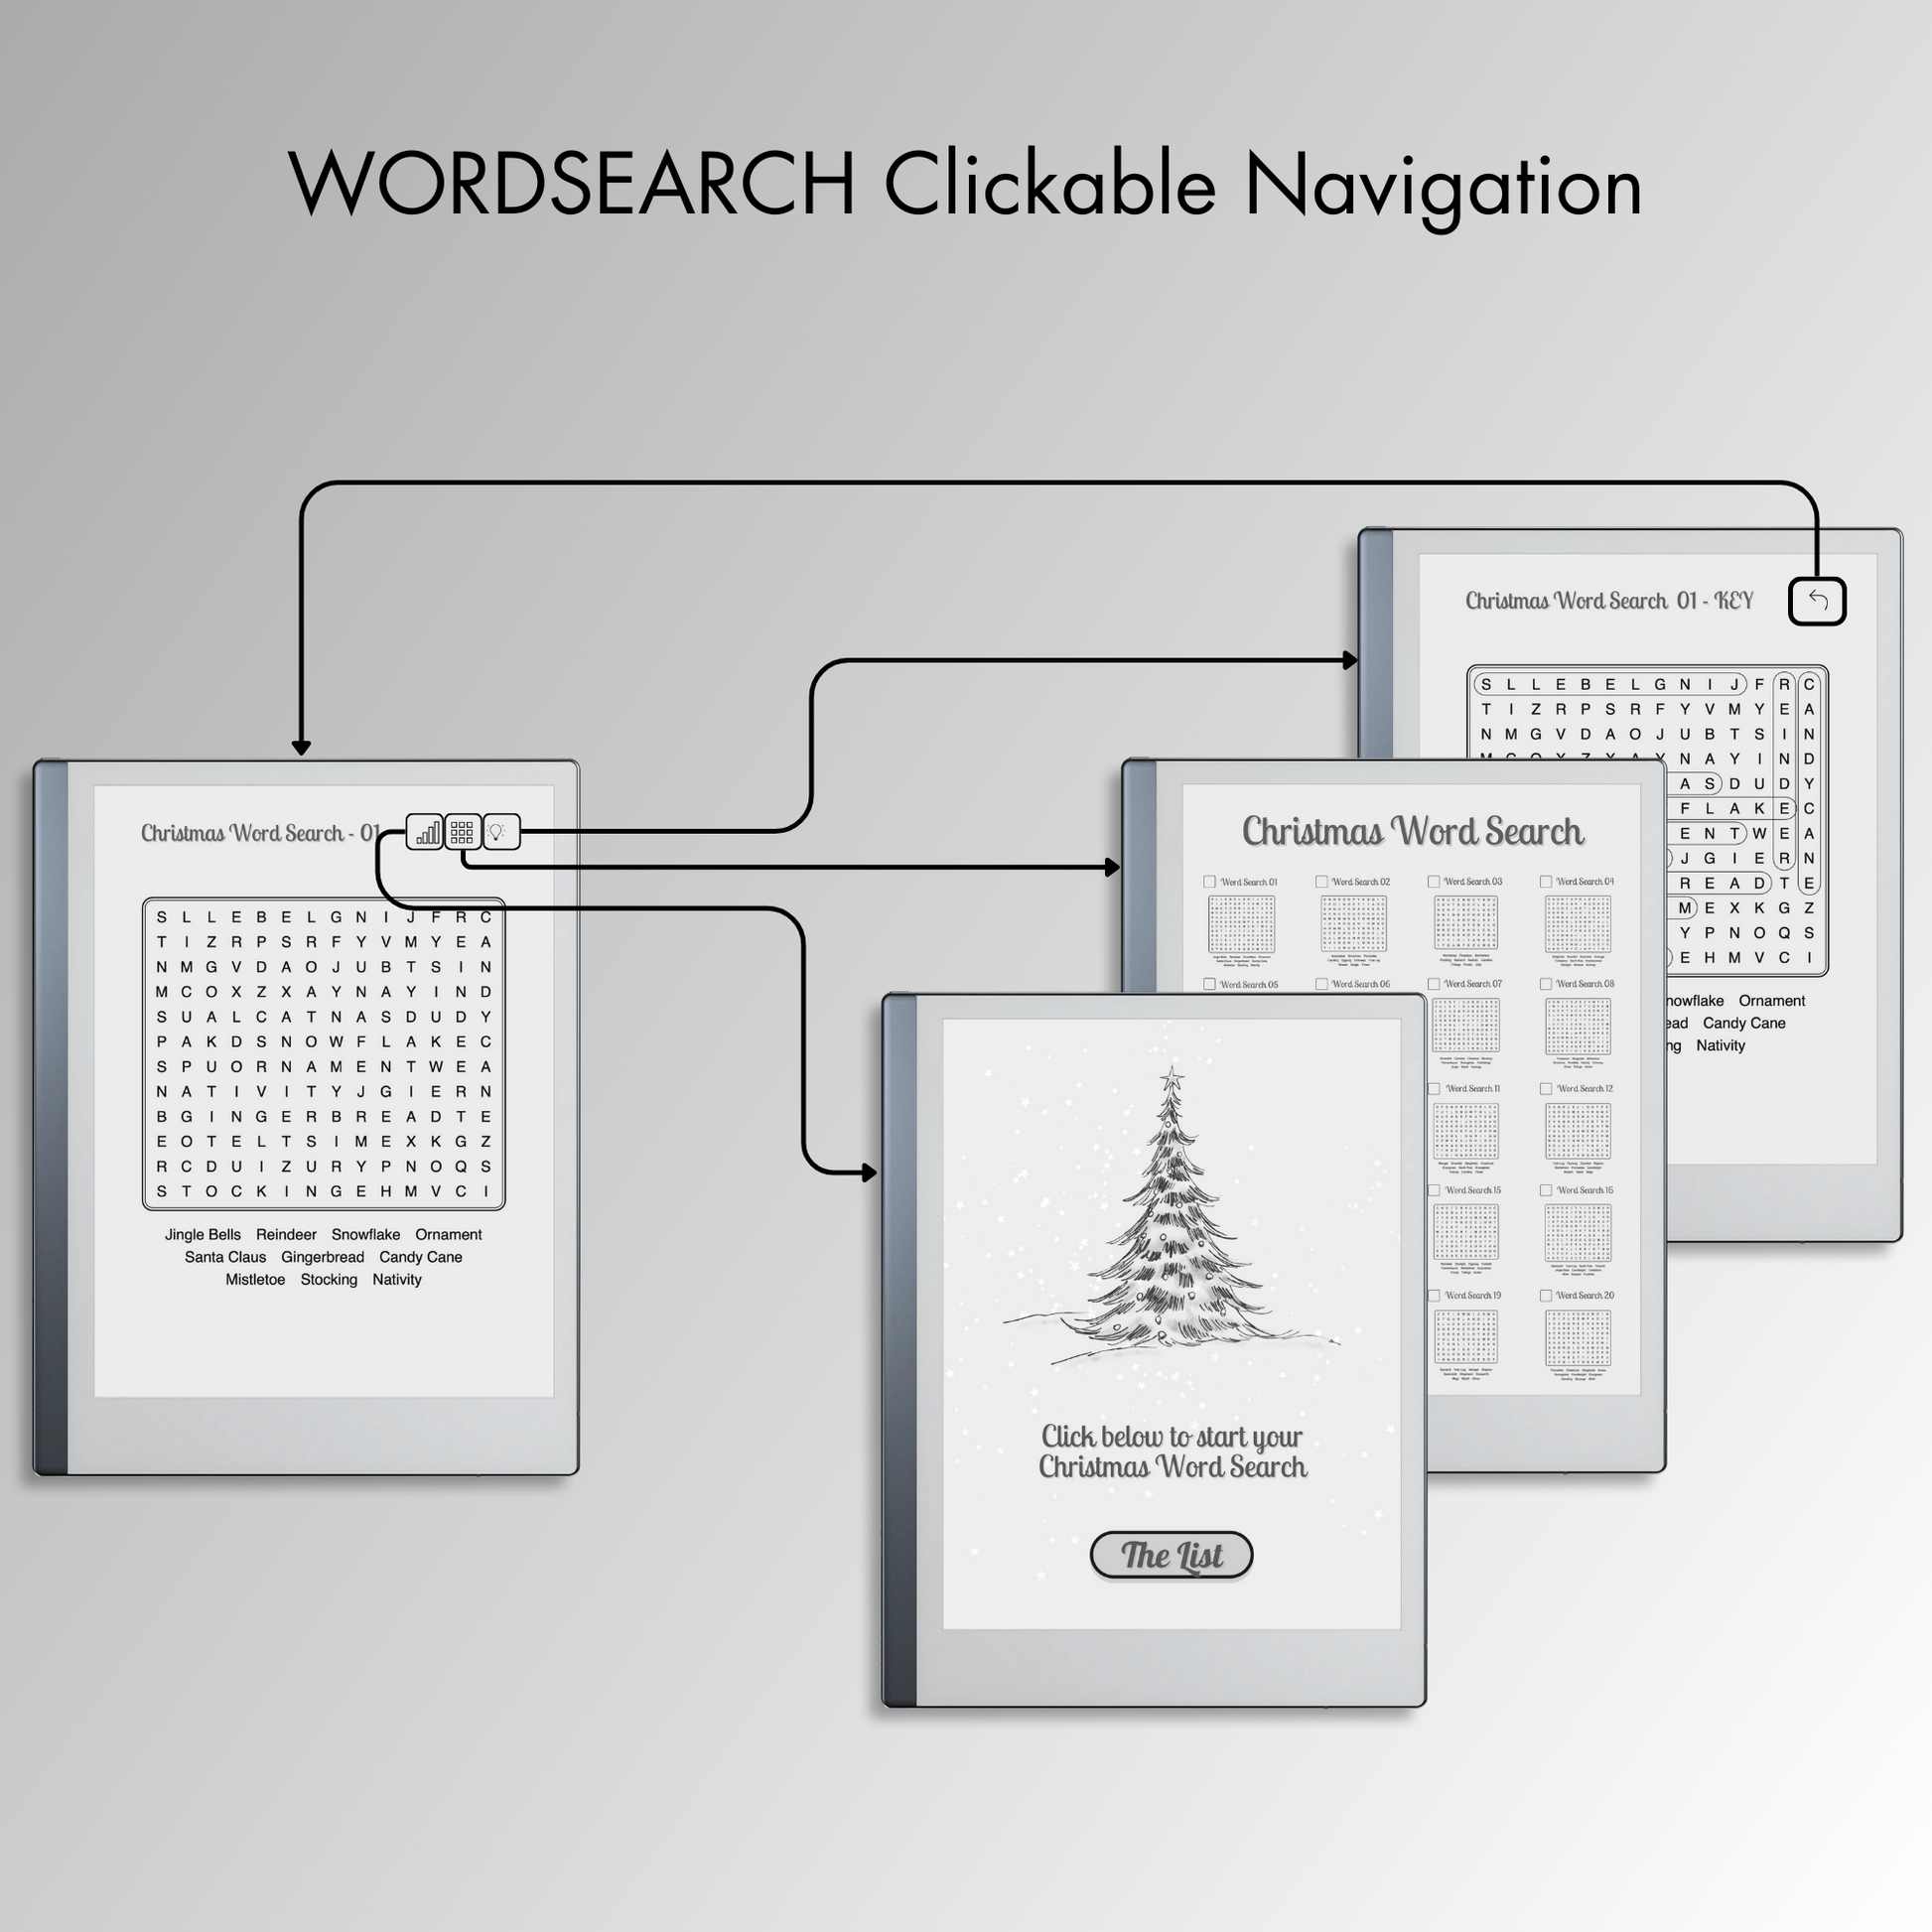 Remarkable 2 Christmas Word Search Puzzles with full reference links.